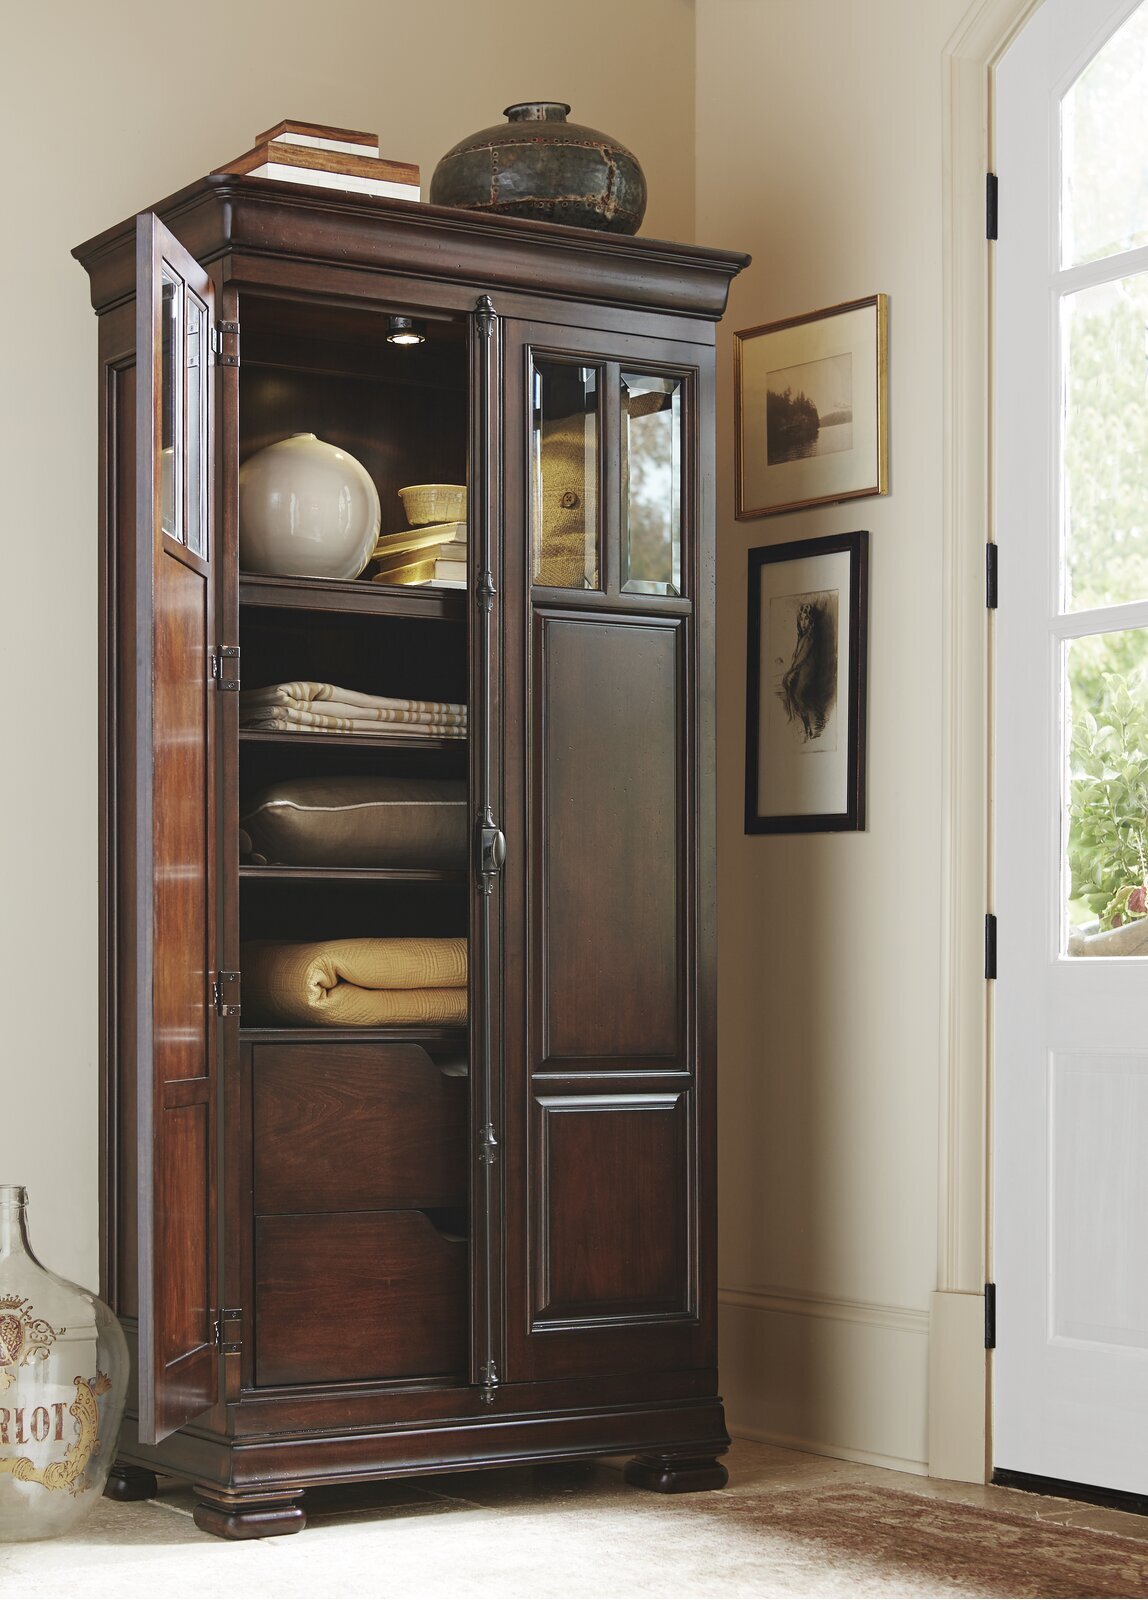 Armoire Used as a Tall Thin Cabinet